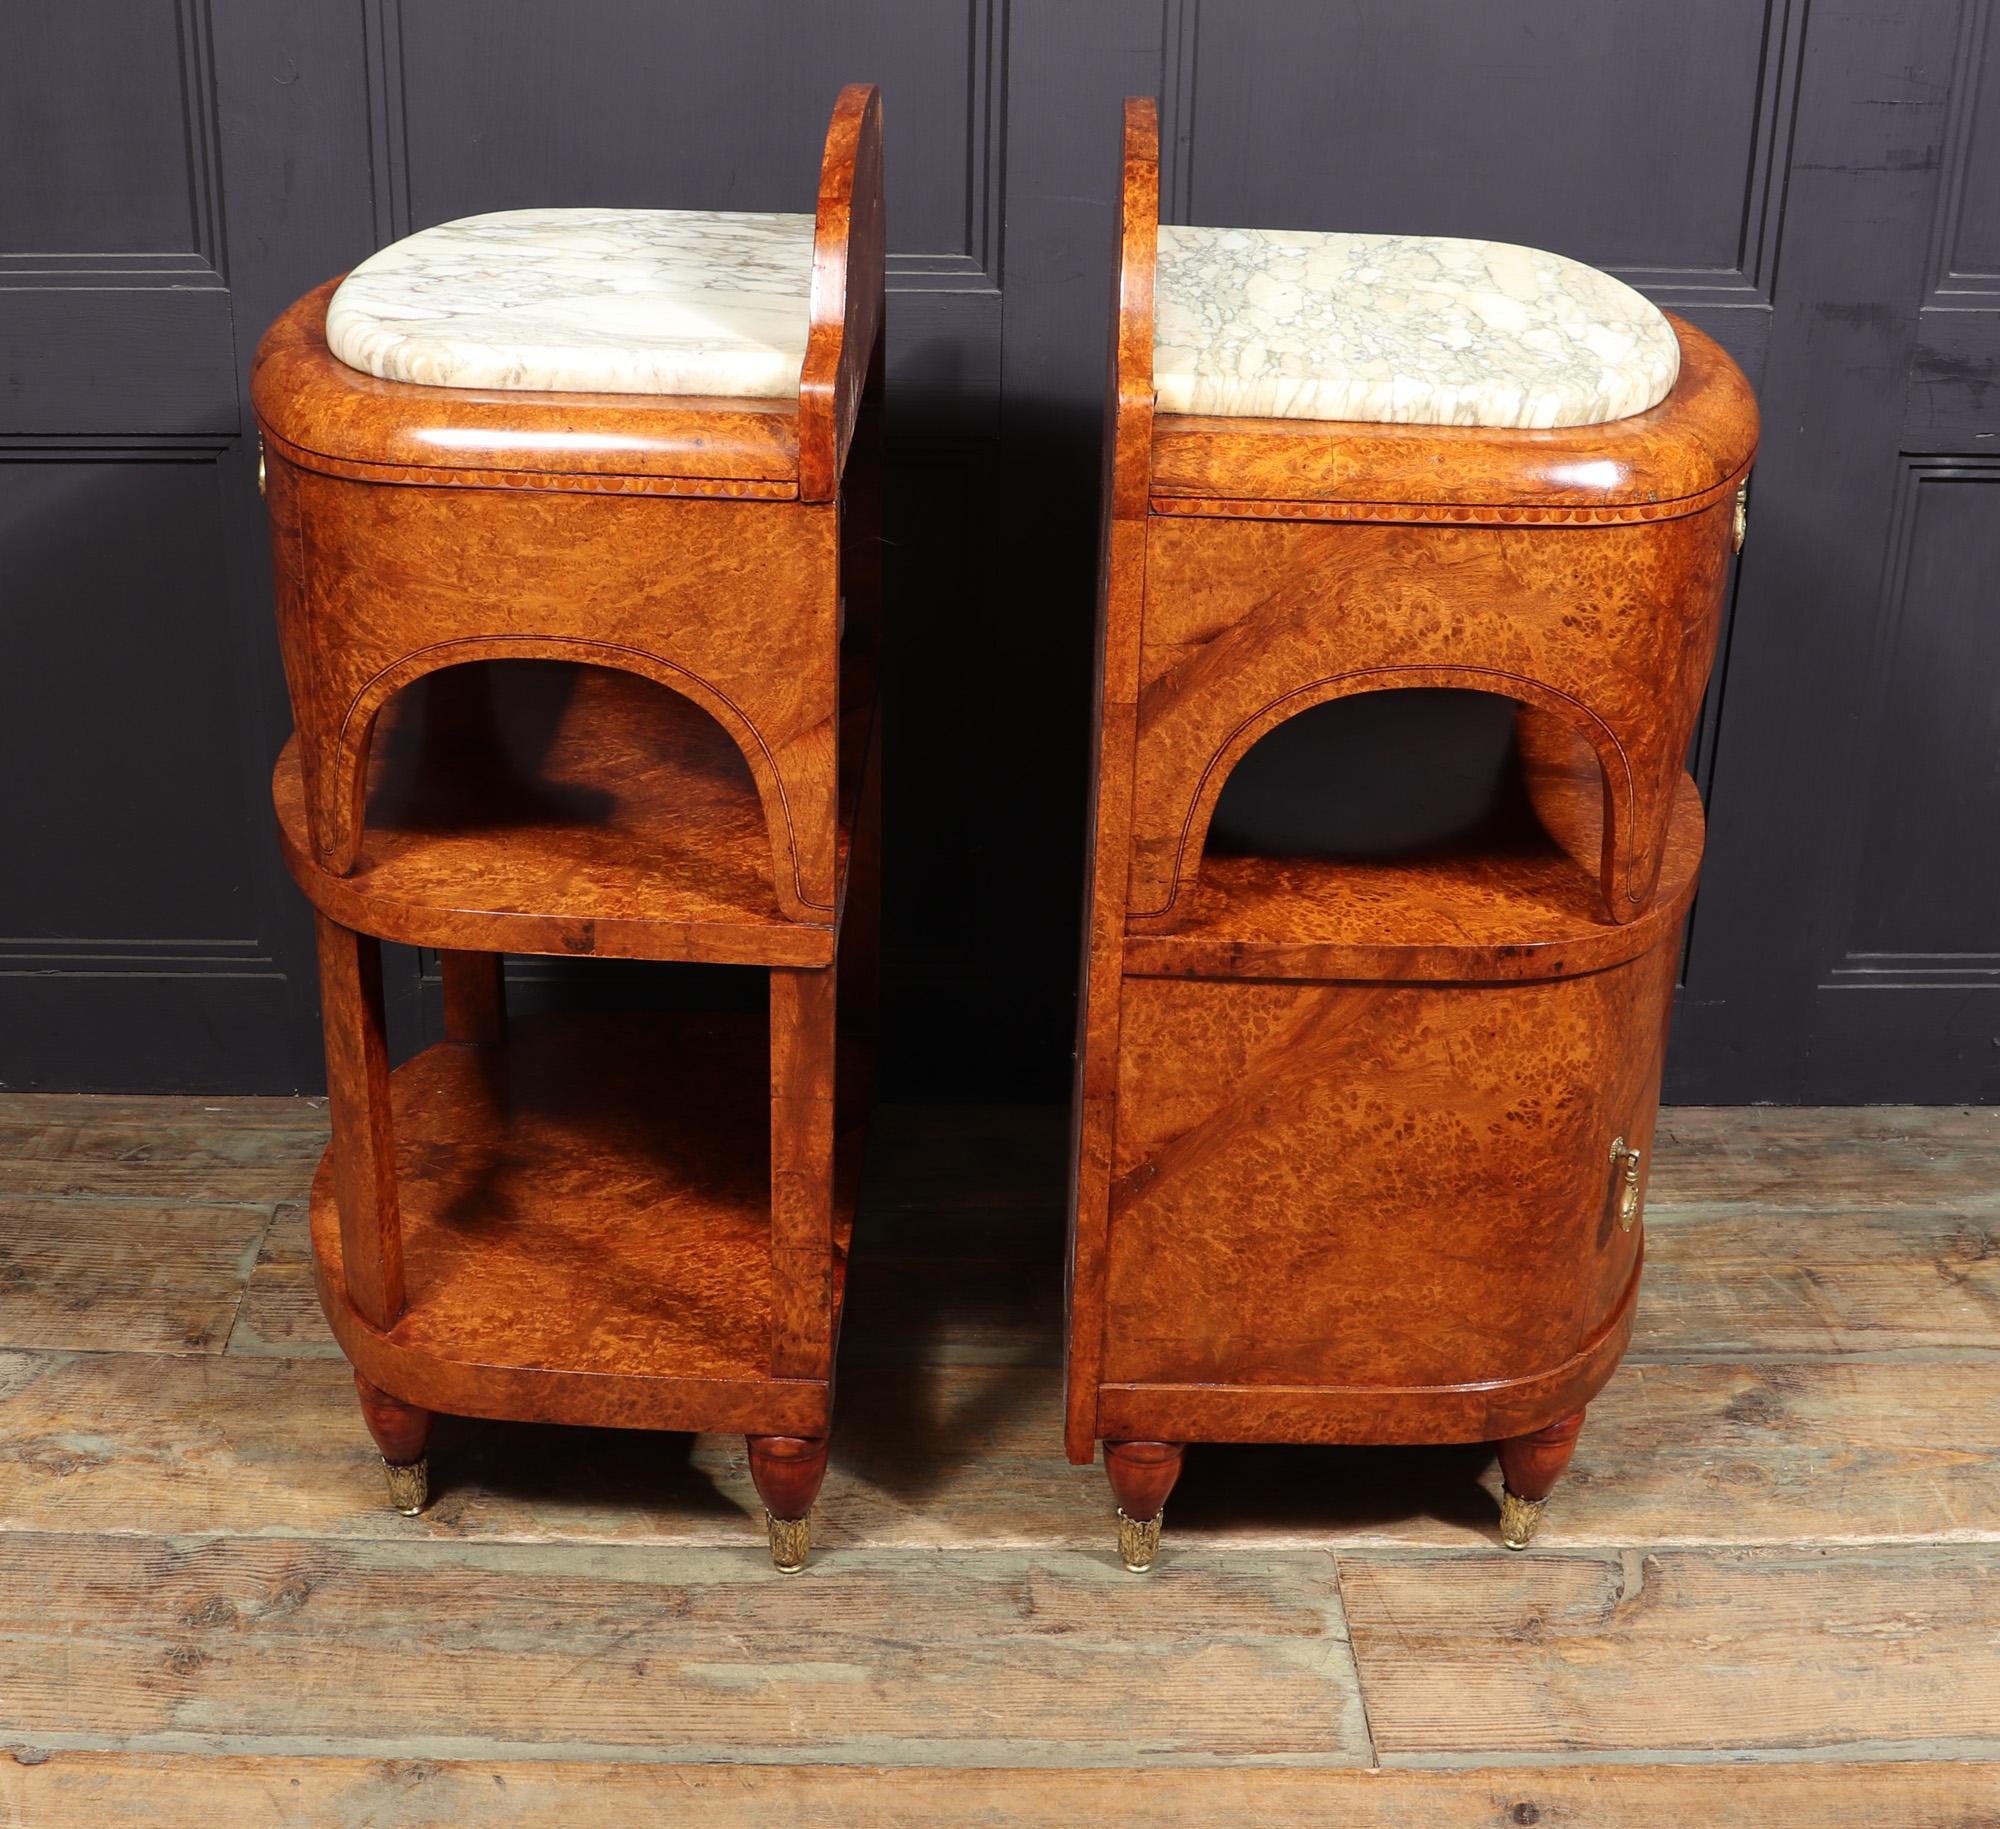 Pair of Art Nouveau Bedside Cabinets in Amboyna c1900 For Sale 11